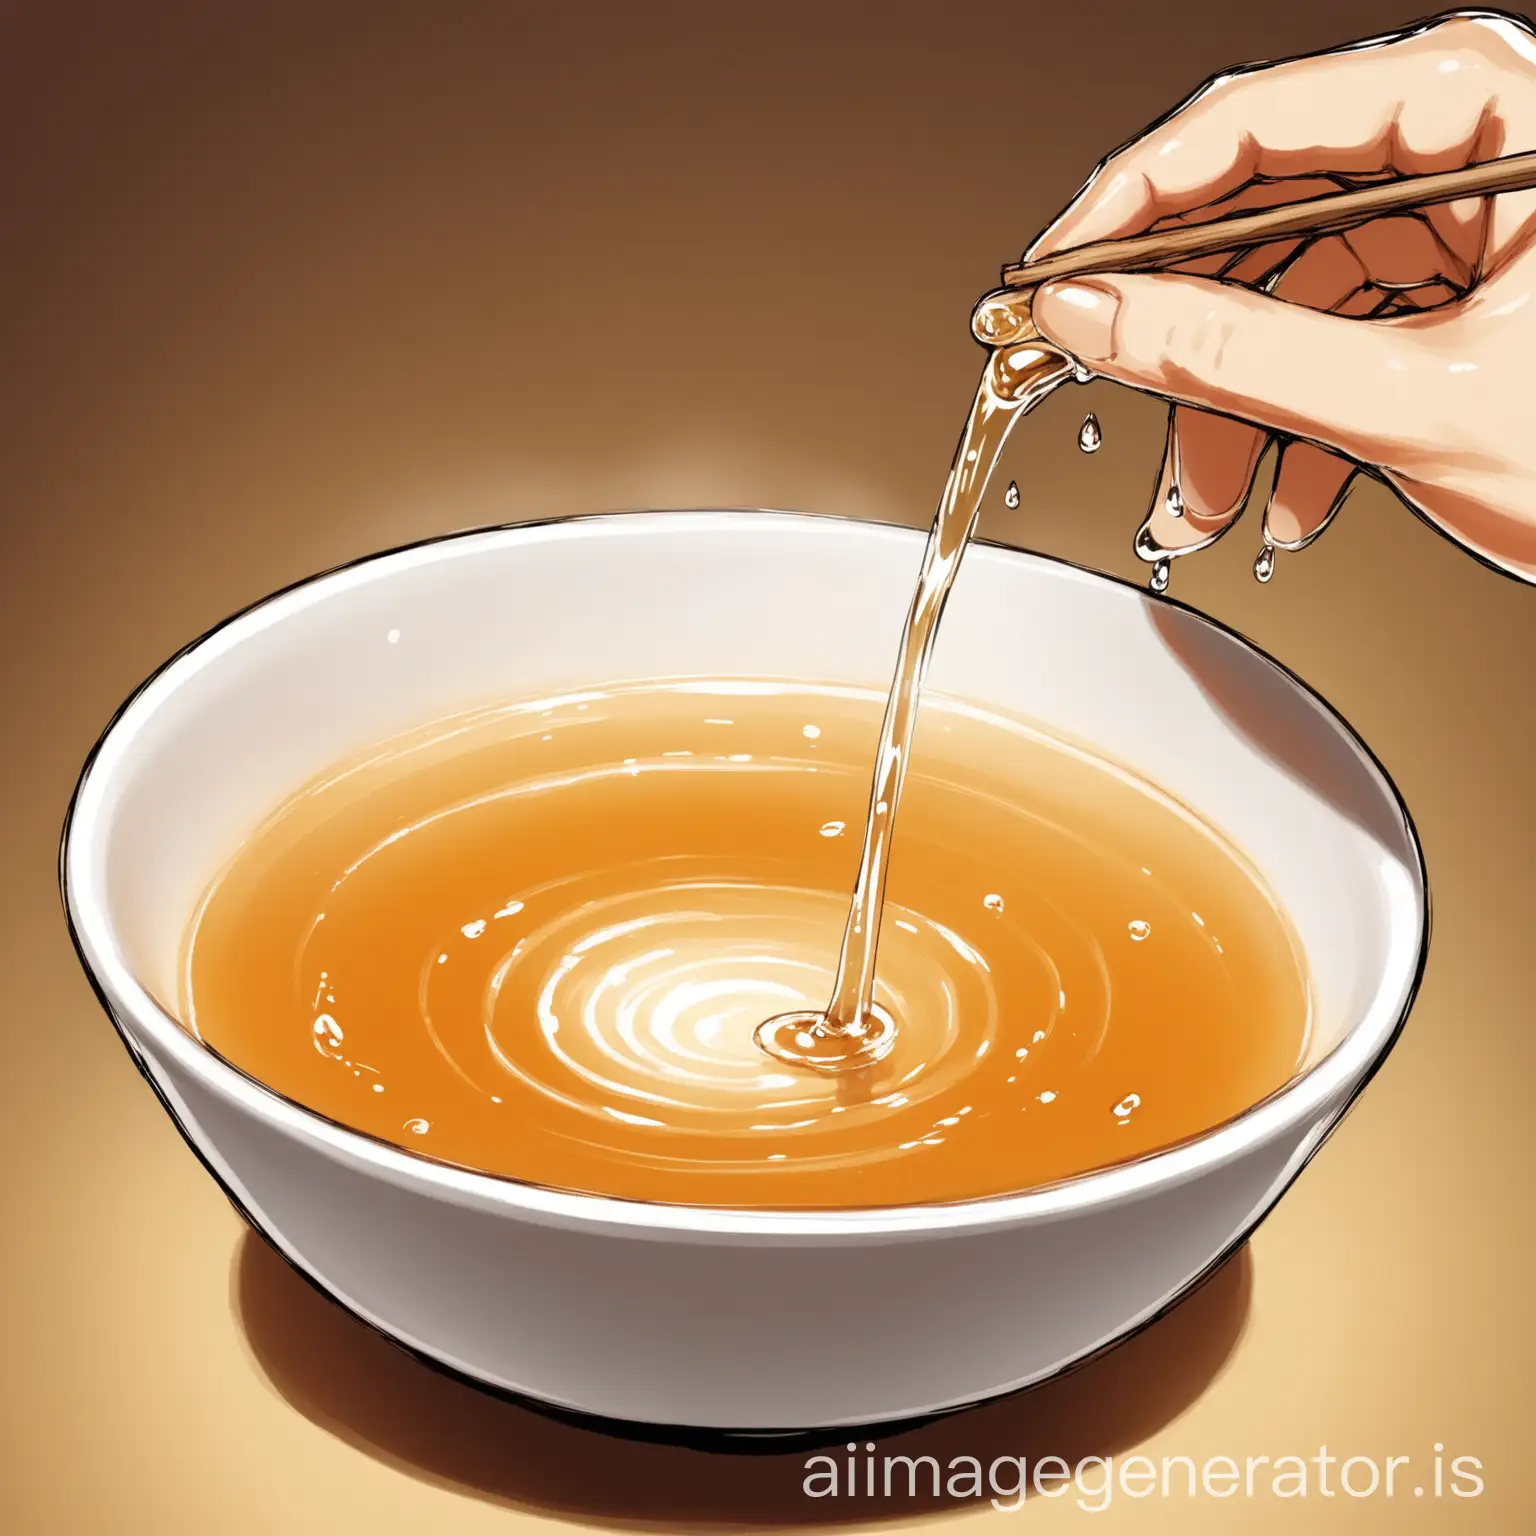 middle medicine person ginseng drips out a drop of water, falls into the soup